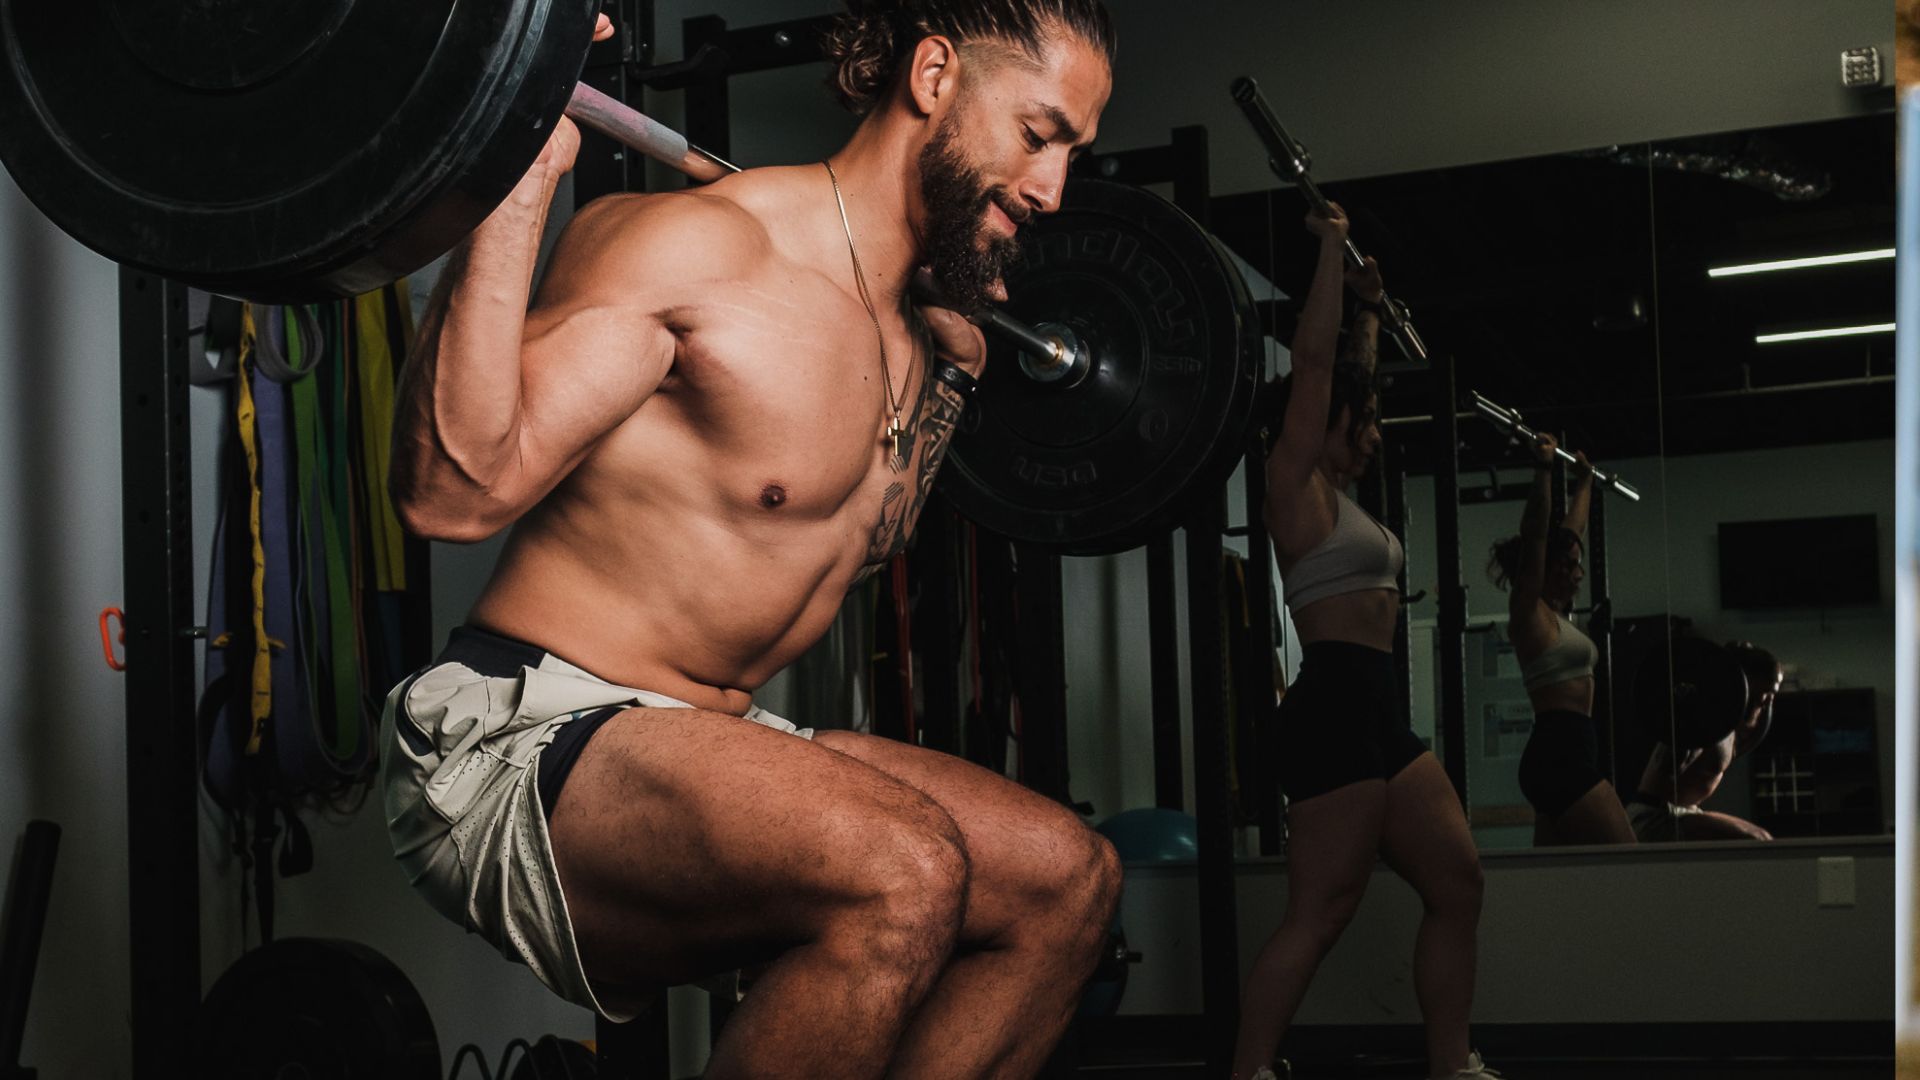 Will Eating More Carbs Help You Build Muscle While Squatting